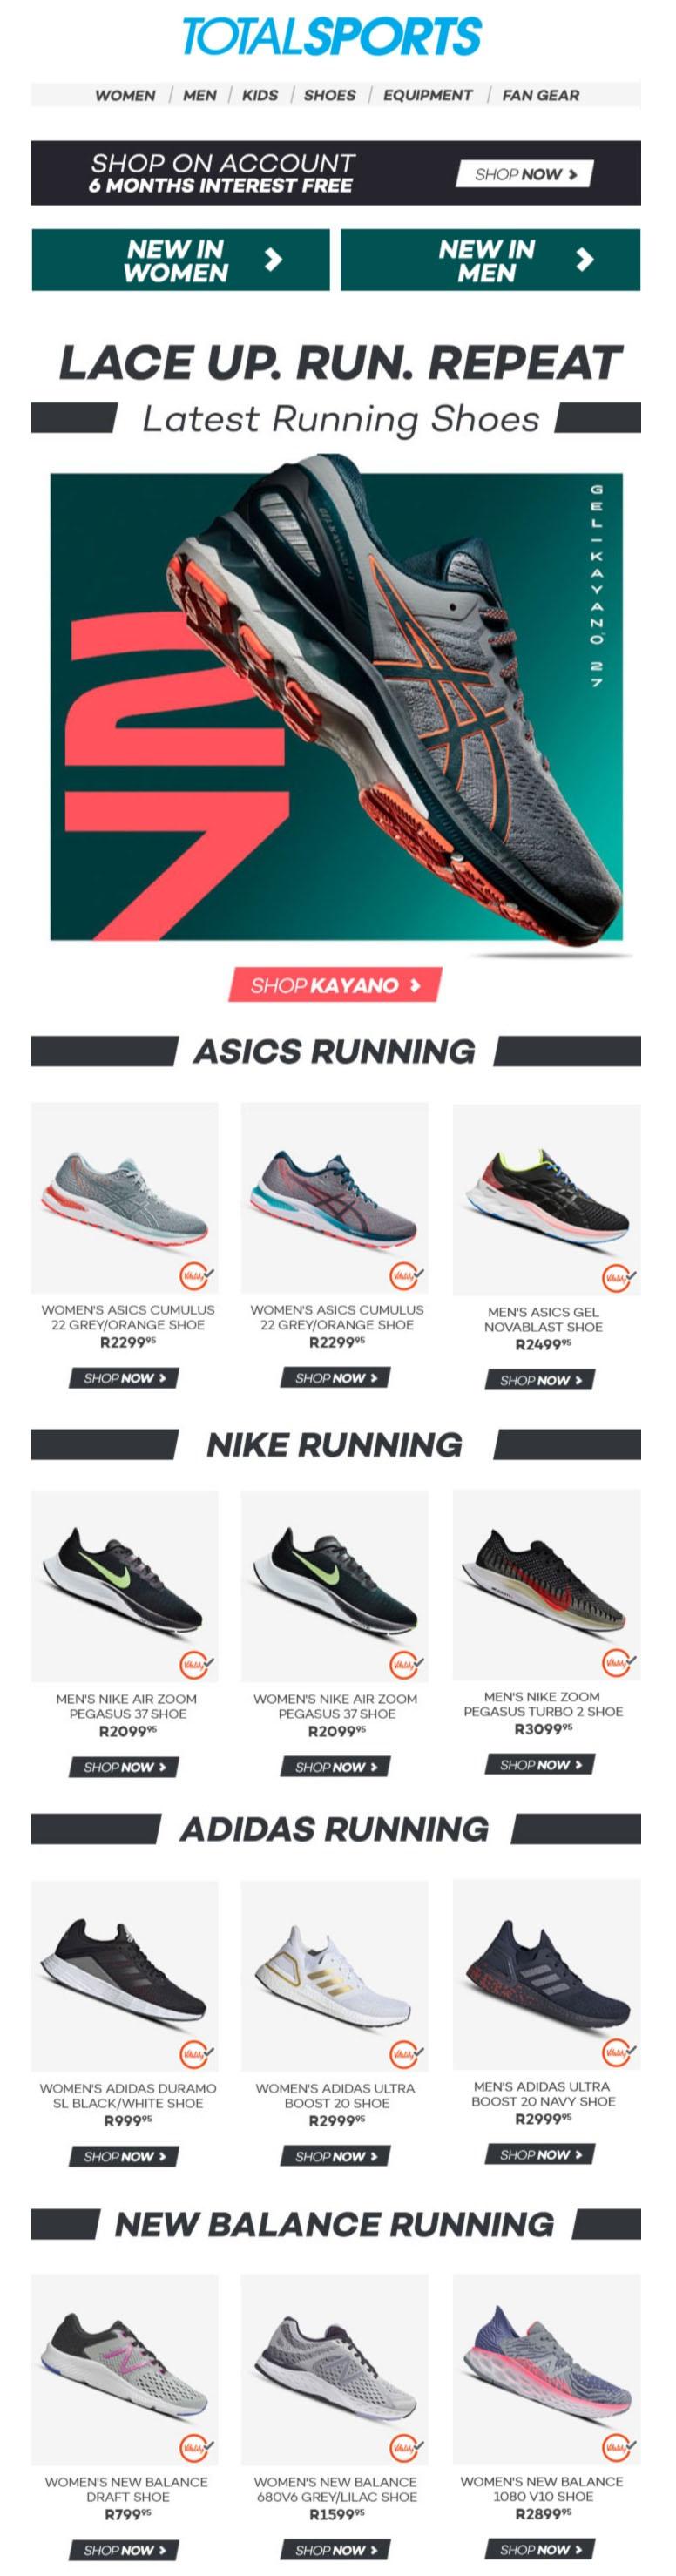 total sports nike running shoes